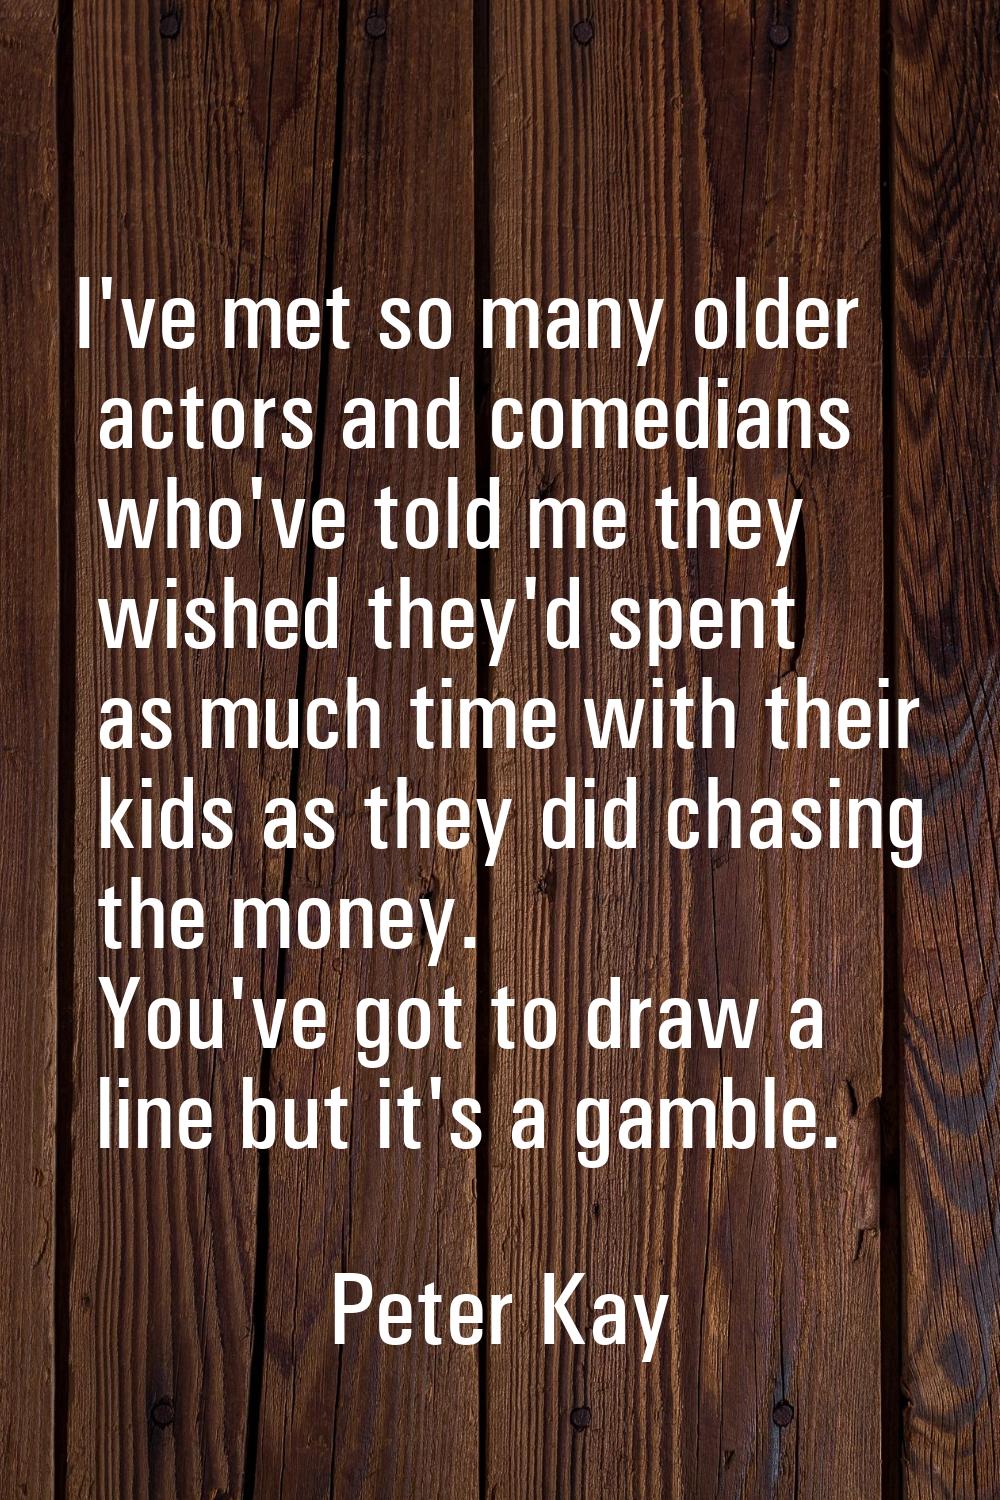 I've met so many older actors and comedians who've told me they wished they'd spent as much time wi